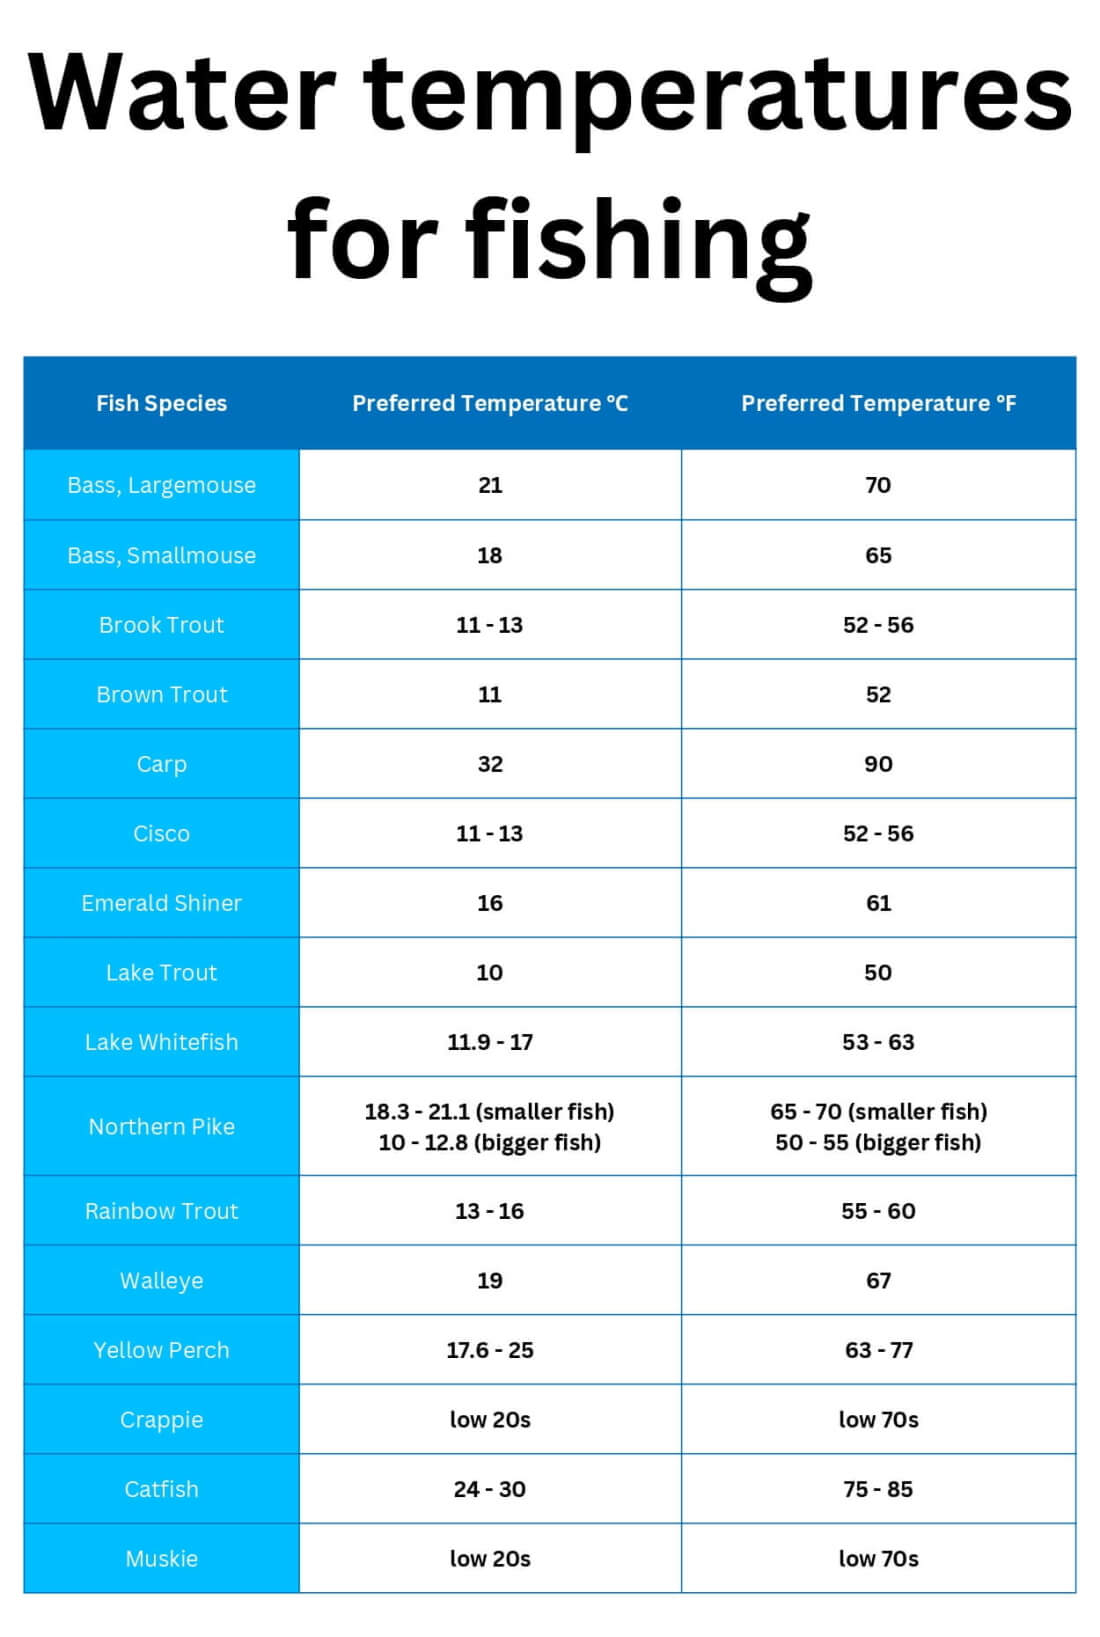 Water temperatures for fishing